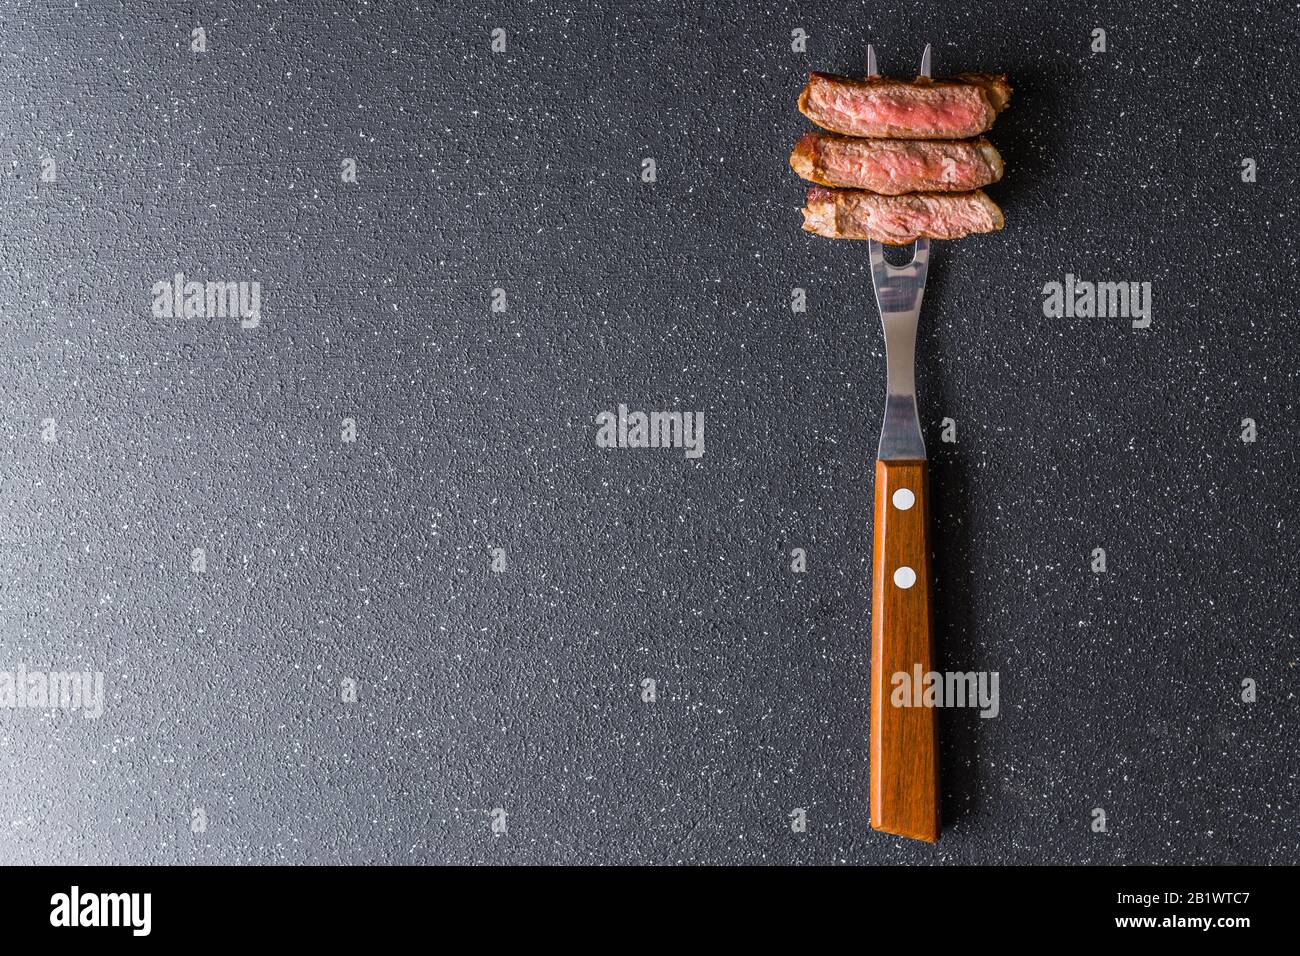 New york strip loin beef steak on a meat fork against black stone background. Stock Photo